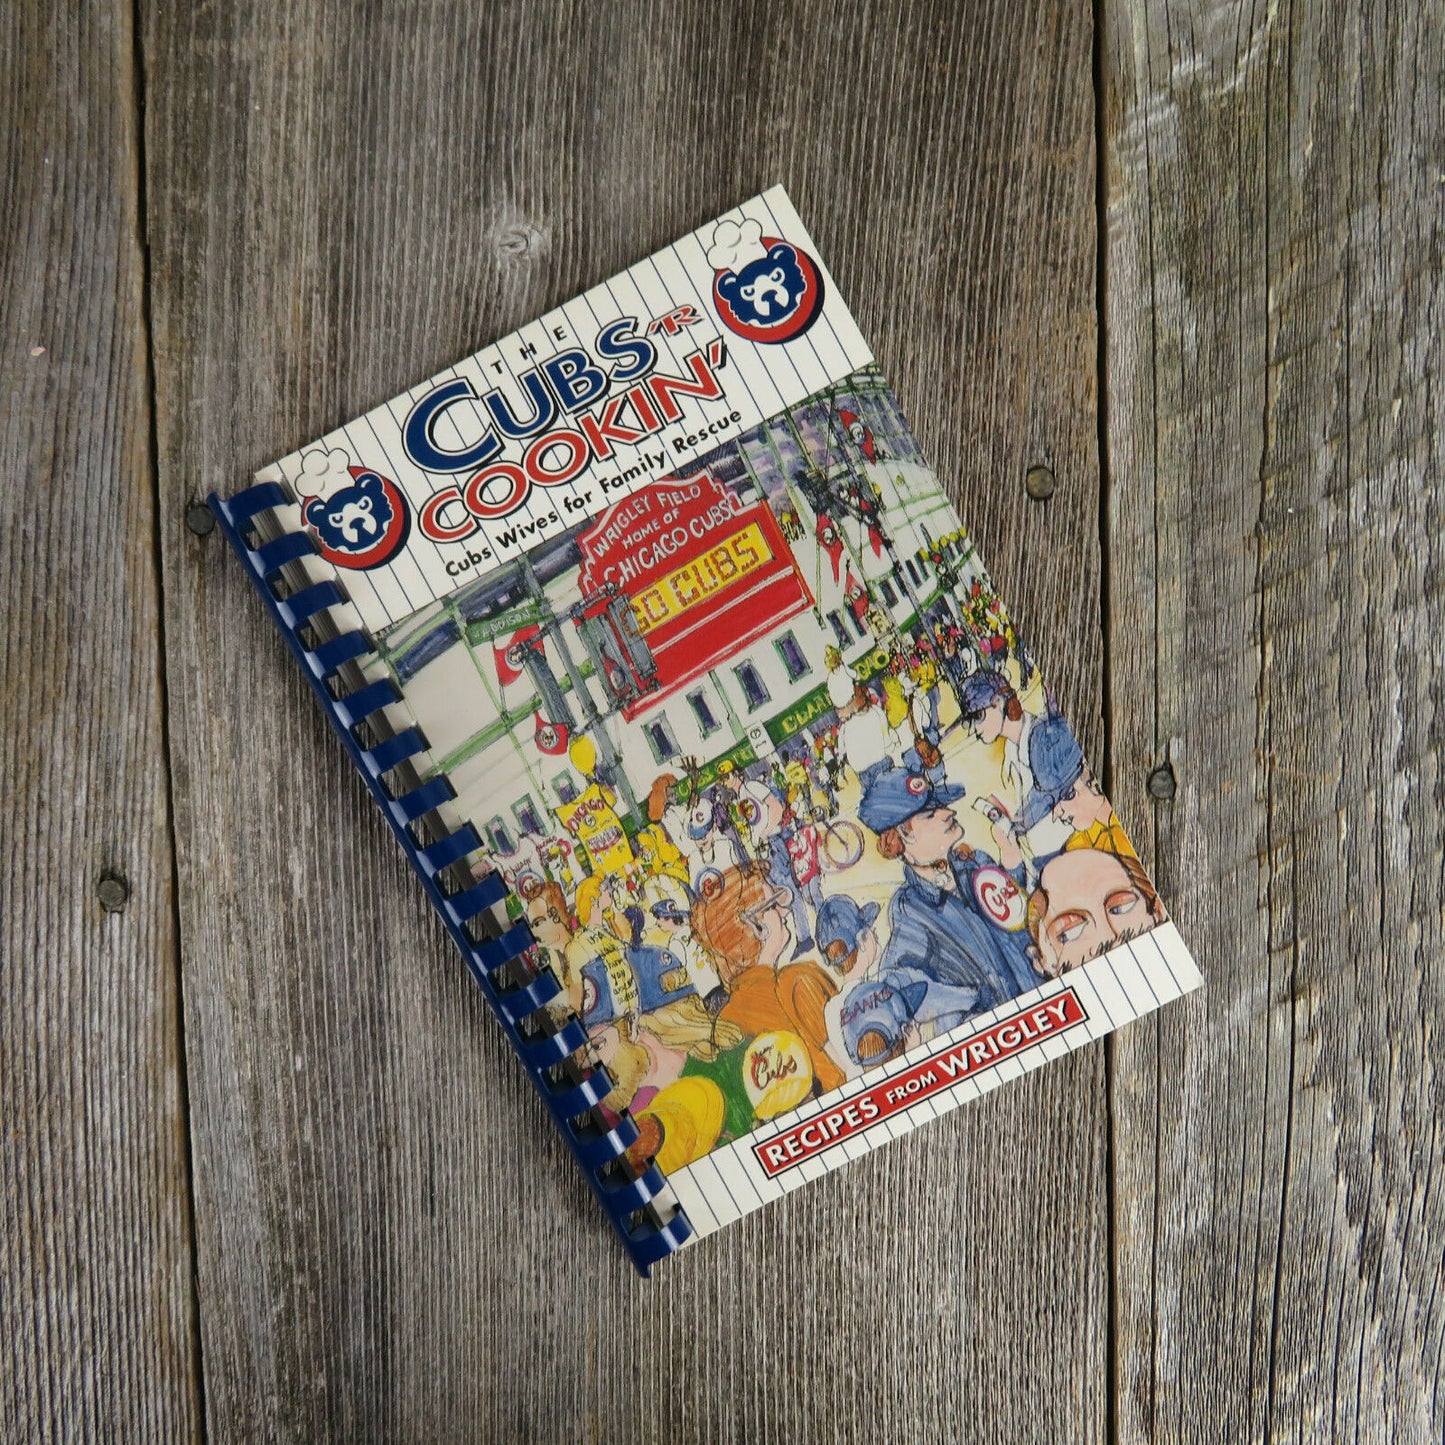 Vintage Chicago Cubs Cookbook Wrigley Field Baseball Wives Family Rescue Recipe - At Grandma's Table